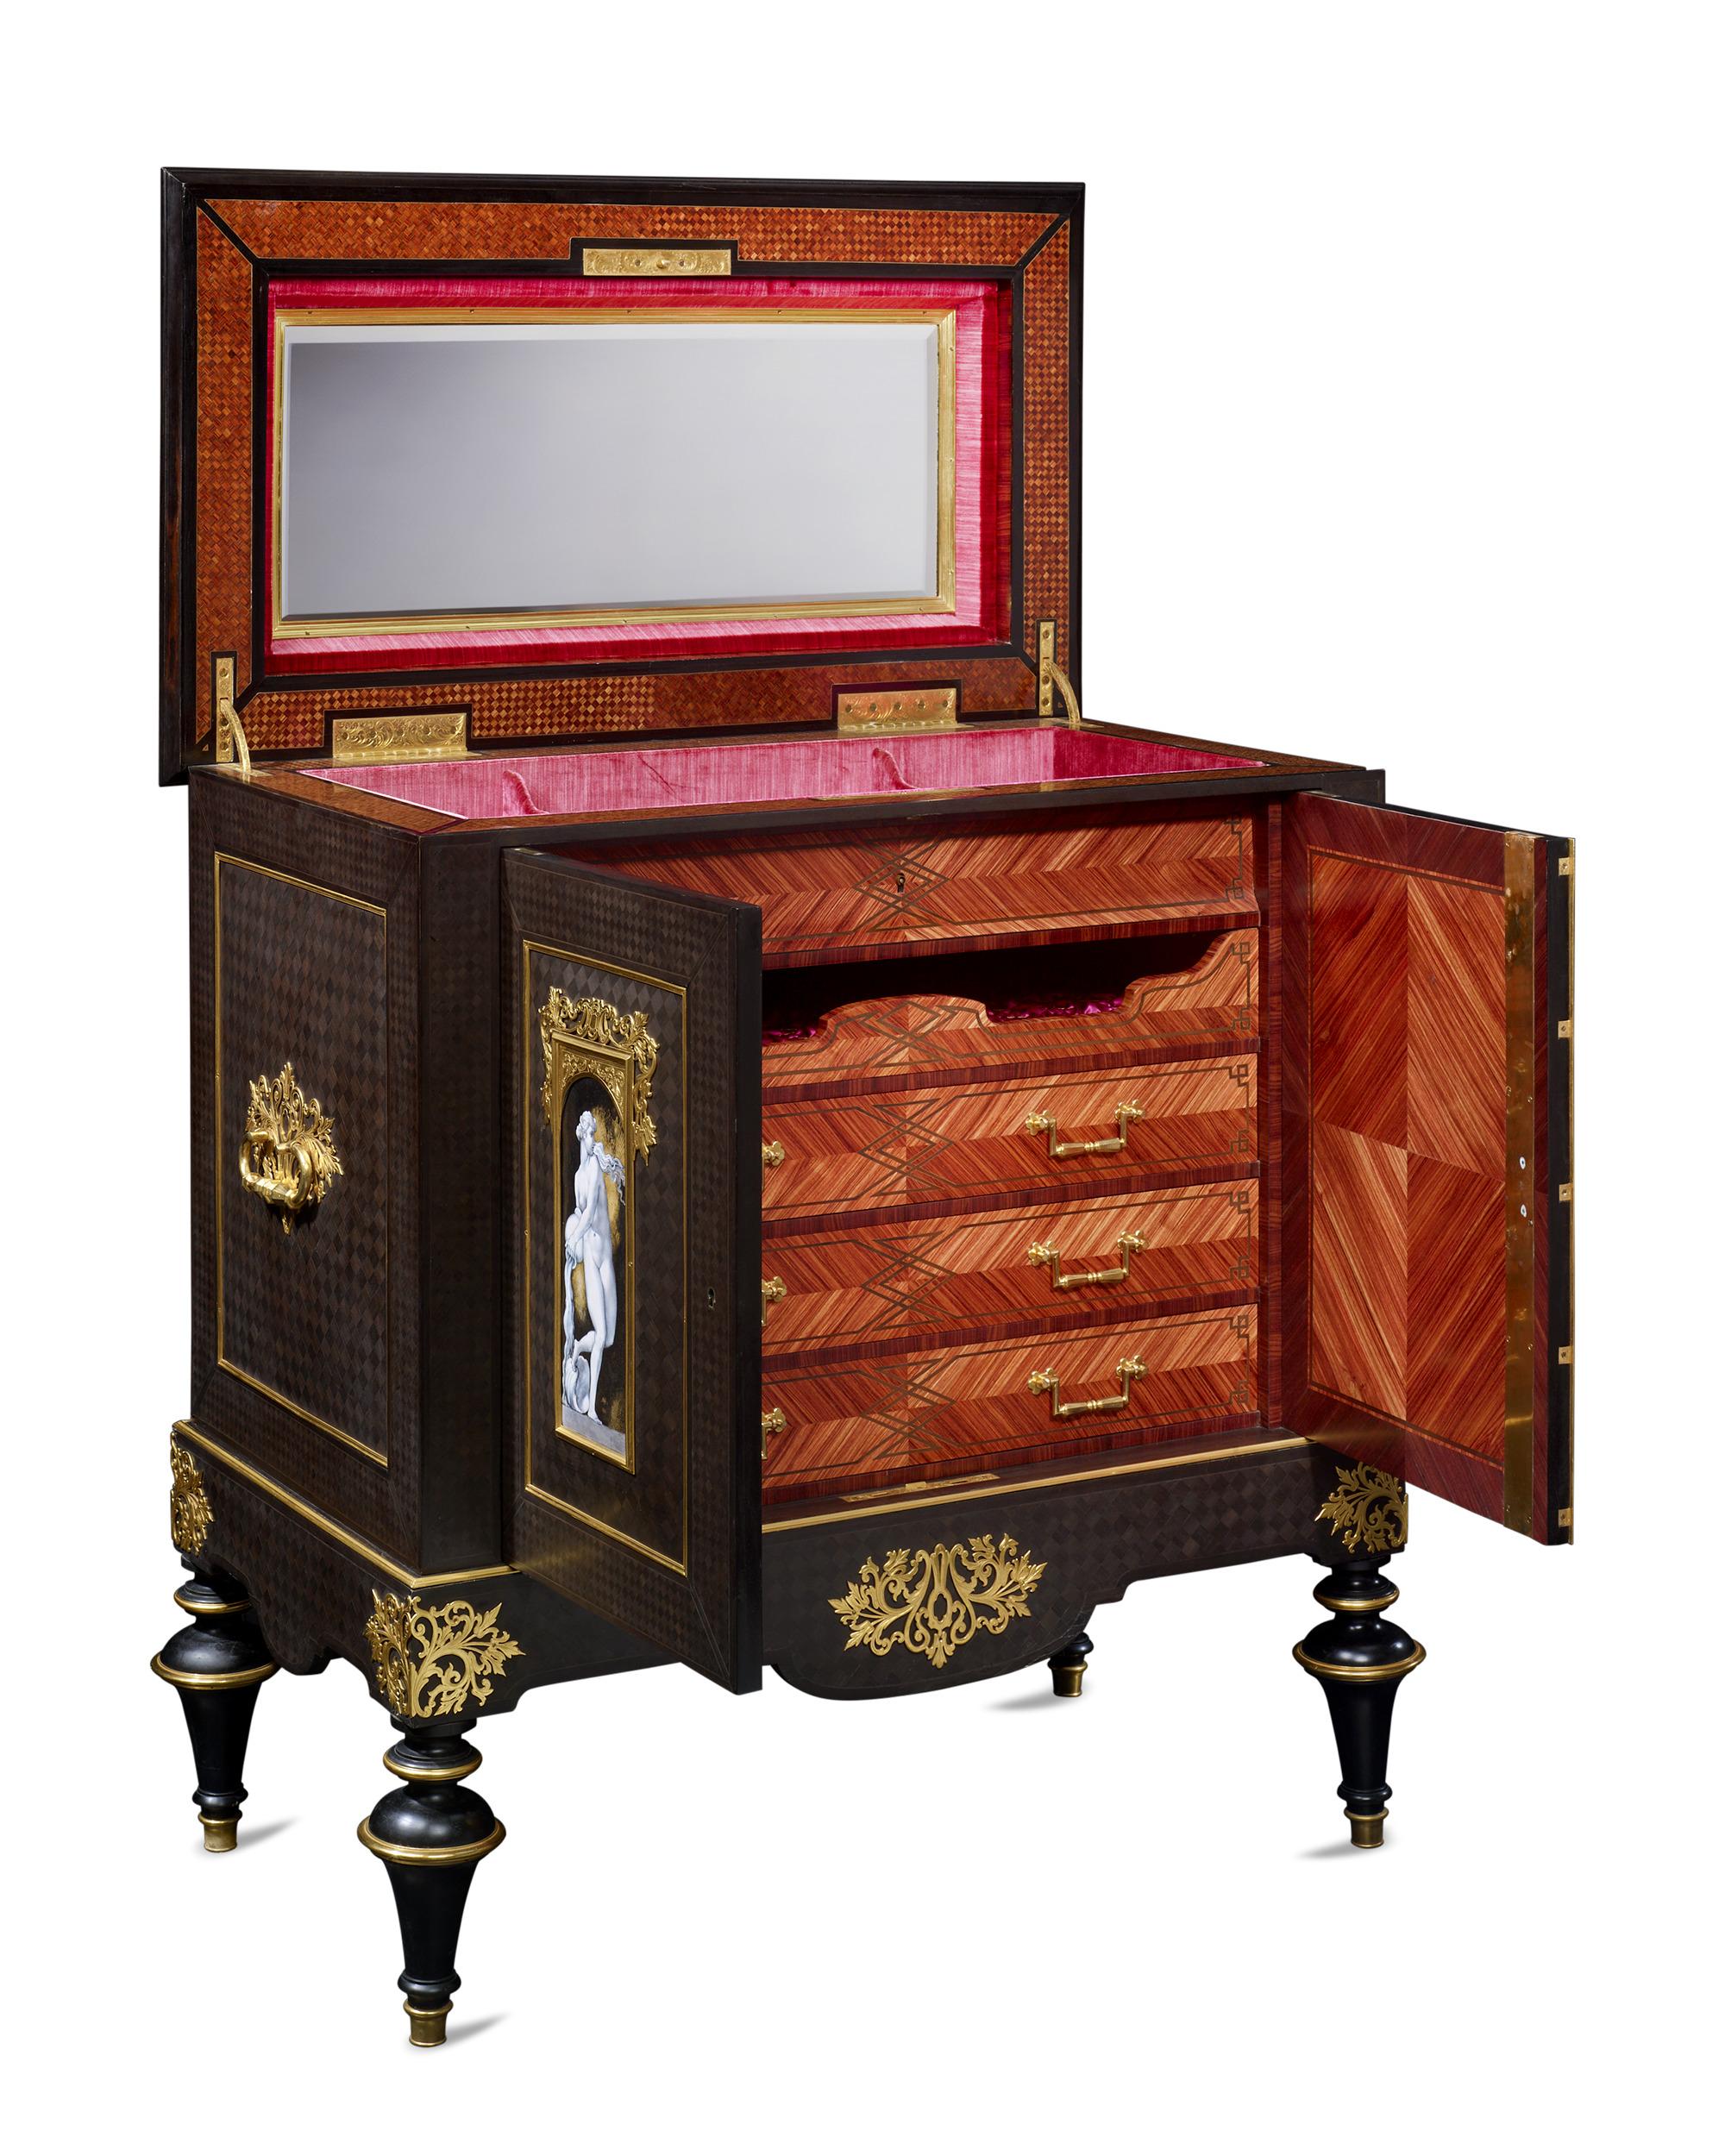 This exceptional and remarkably large jewelry cabinet by celebrated Parisian ébéniste Alphonse Giroux was created during the height of the Second Empire when the style of Napoleon III reached its highest level of expression and elegance. The